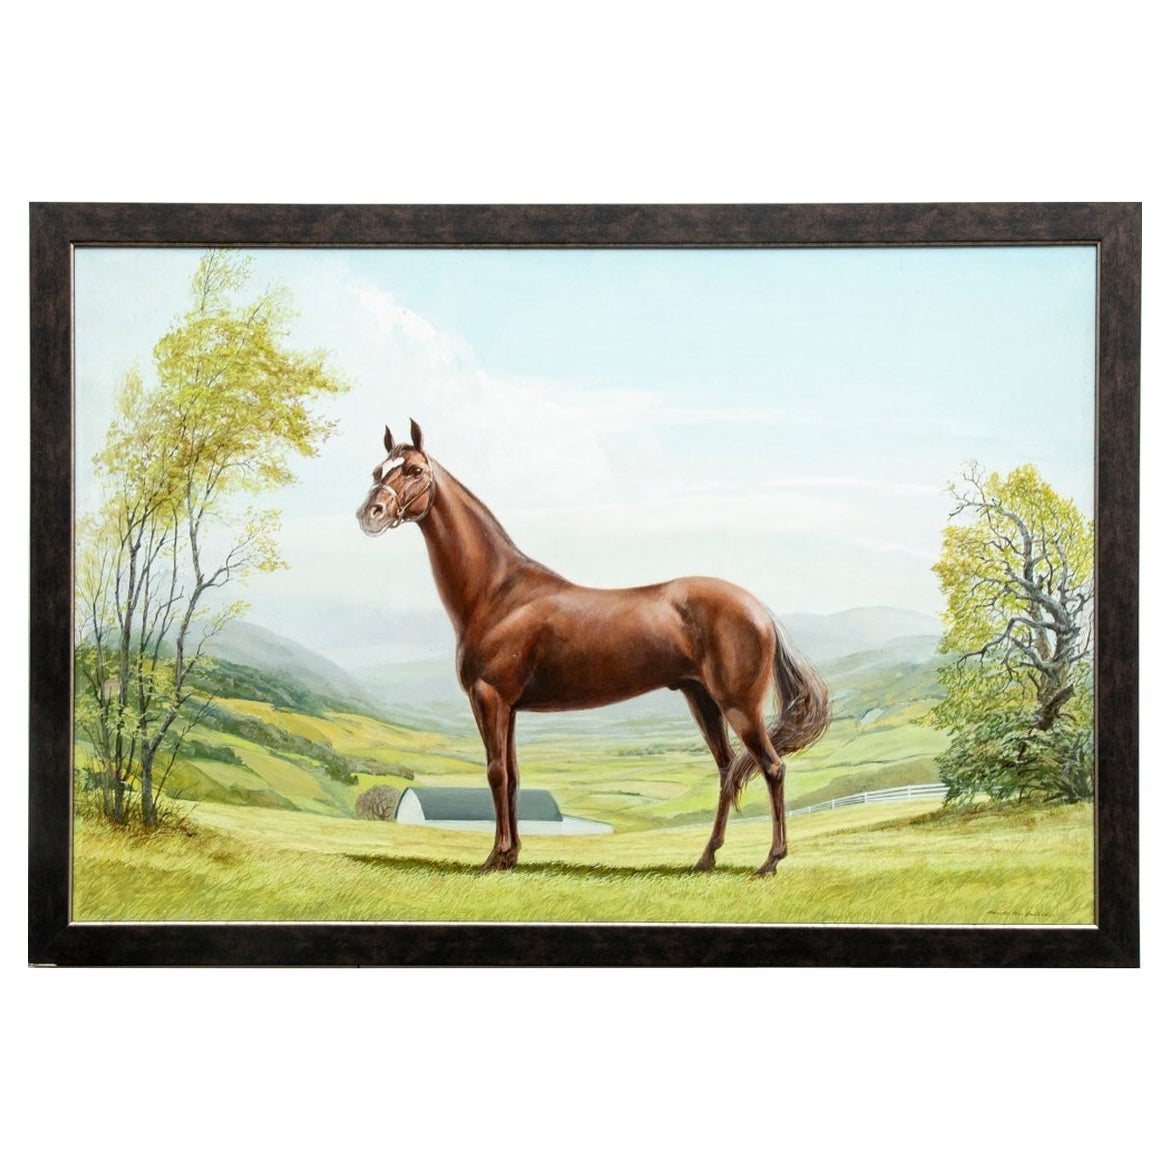 Original Oil on Board 1950, “Portrait of a Horse”, Signed Lower Right by Harold For Sale